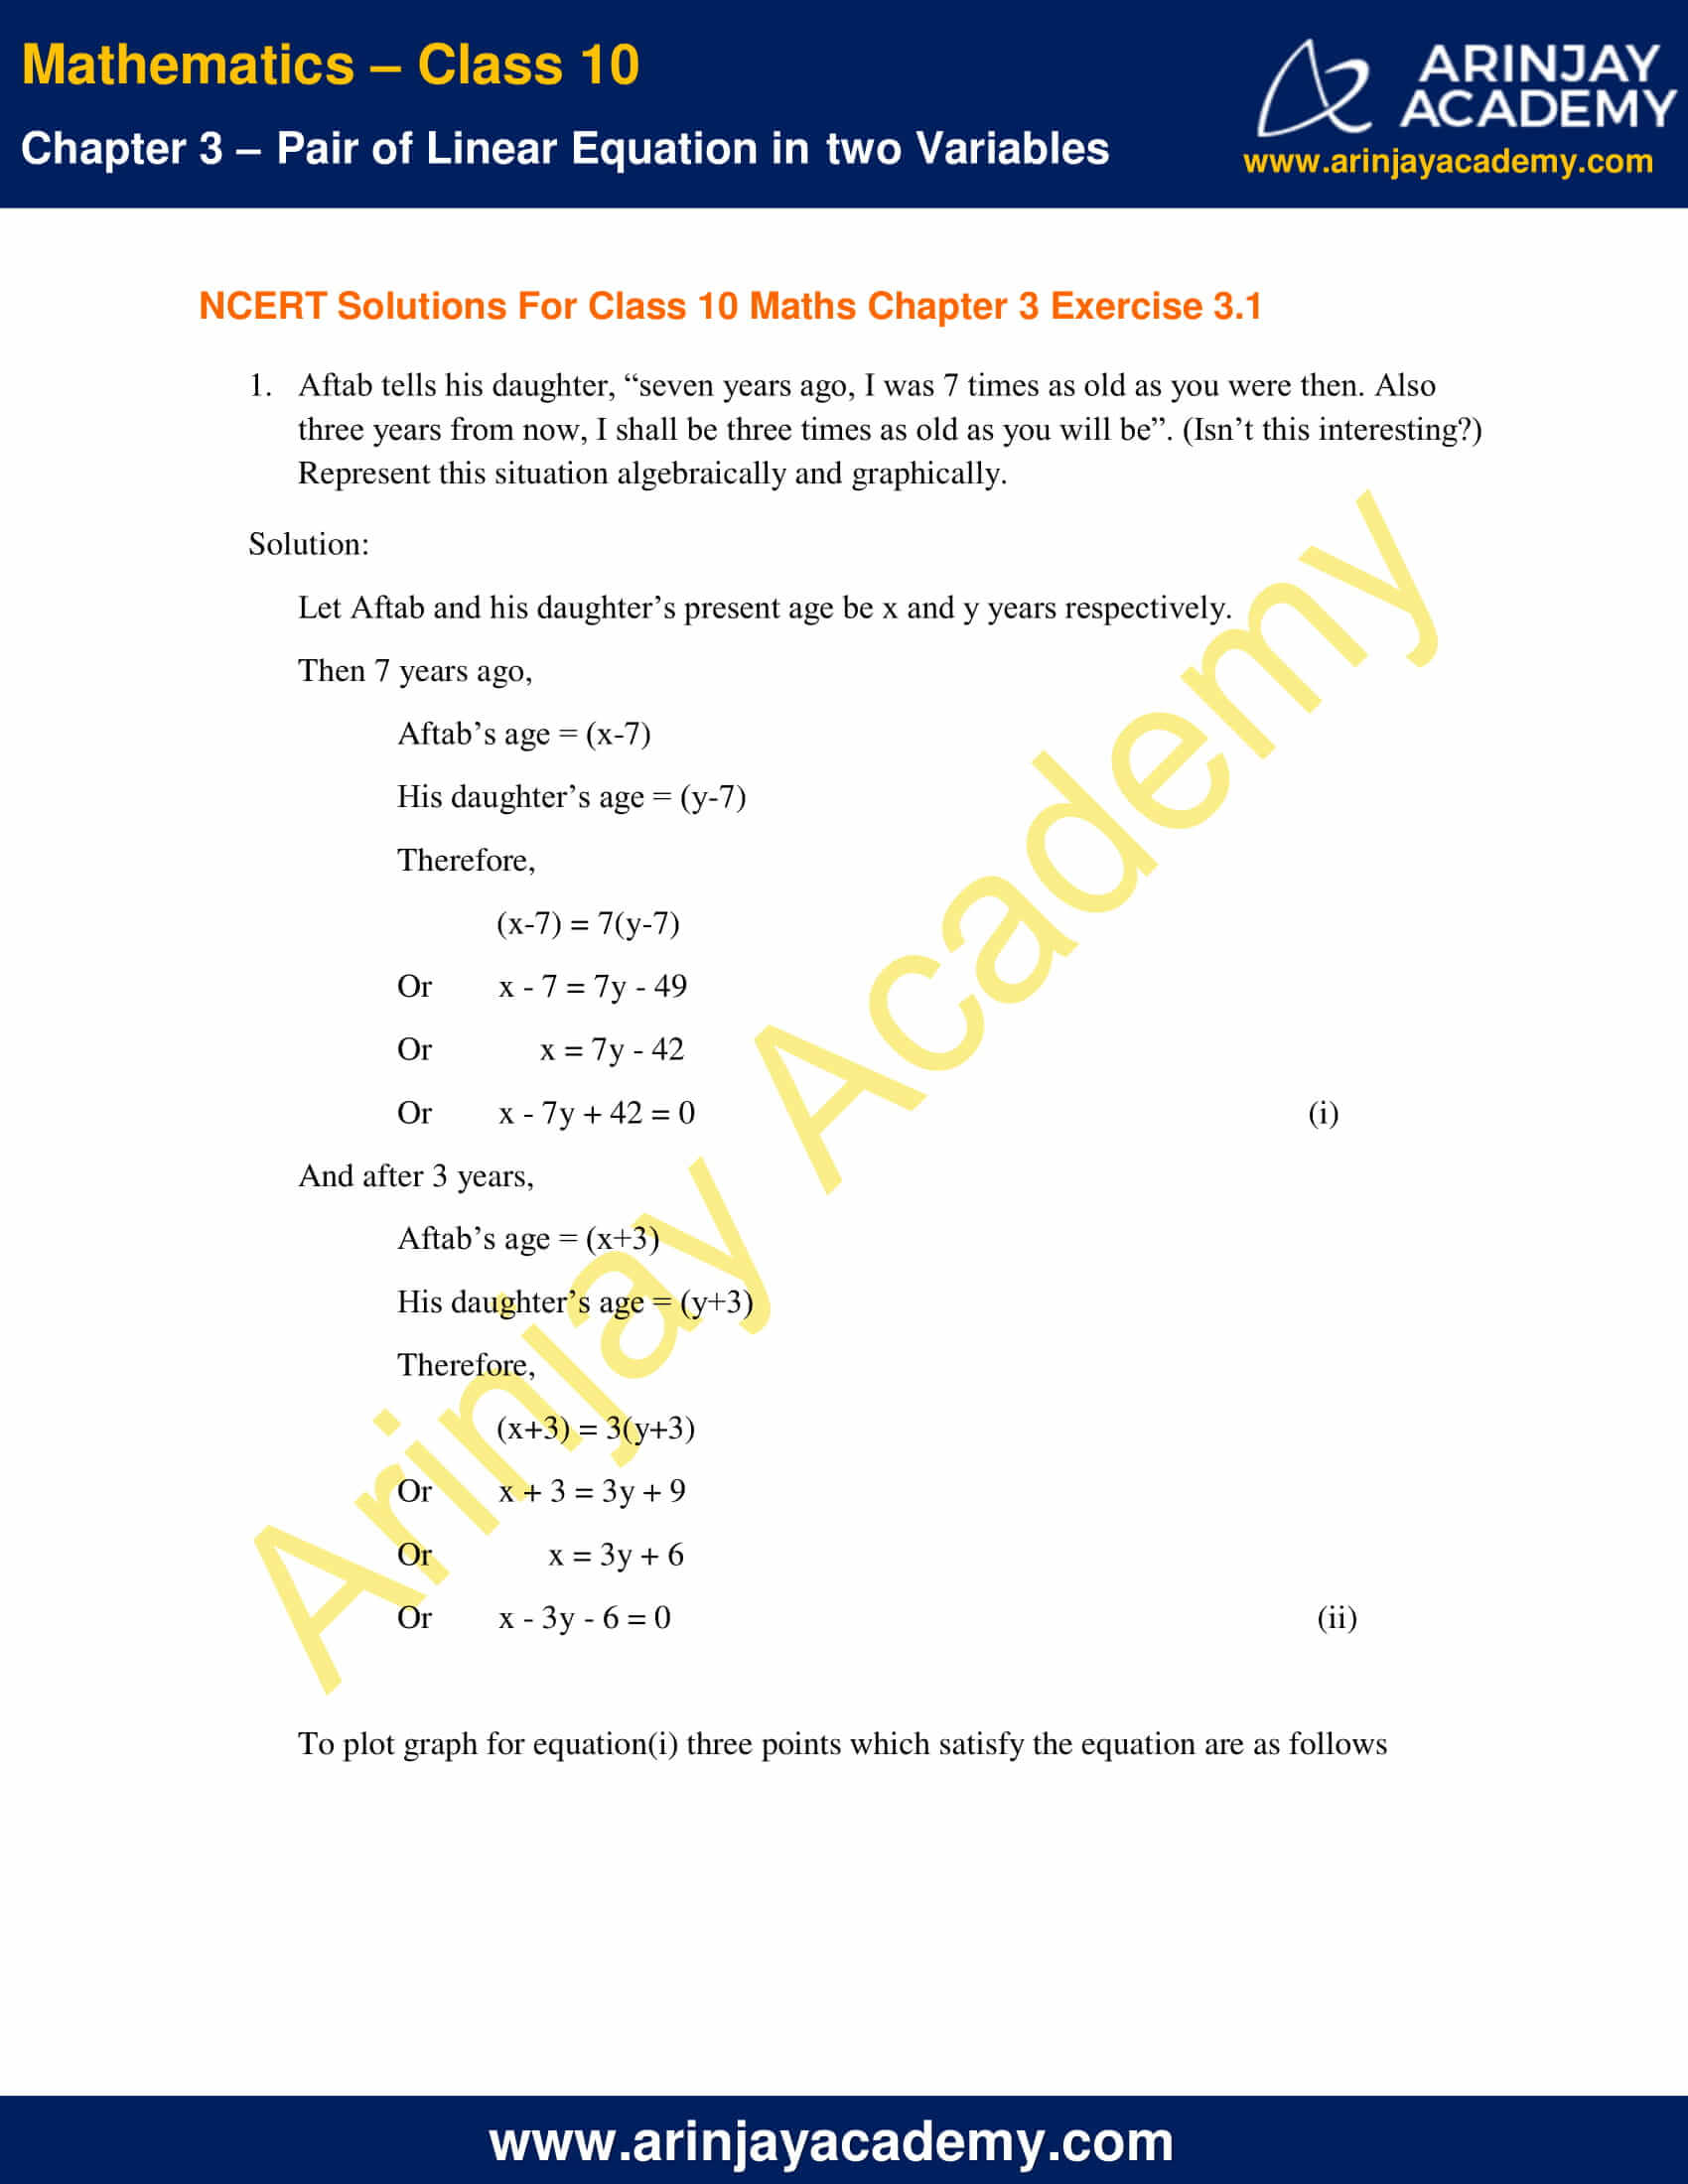 NCERT Solutions For Class 10 Maths Chapter 3 Exercise 3.1 image 1